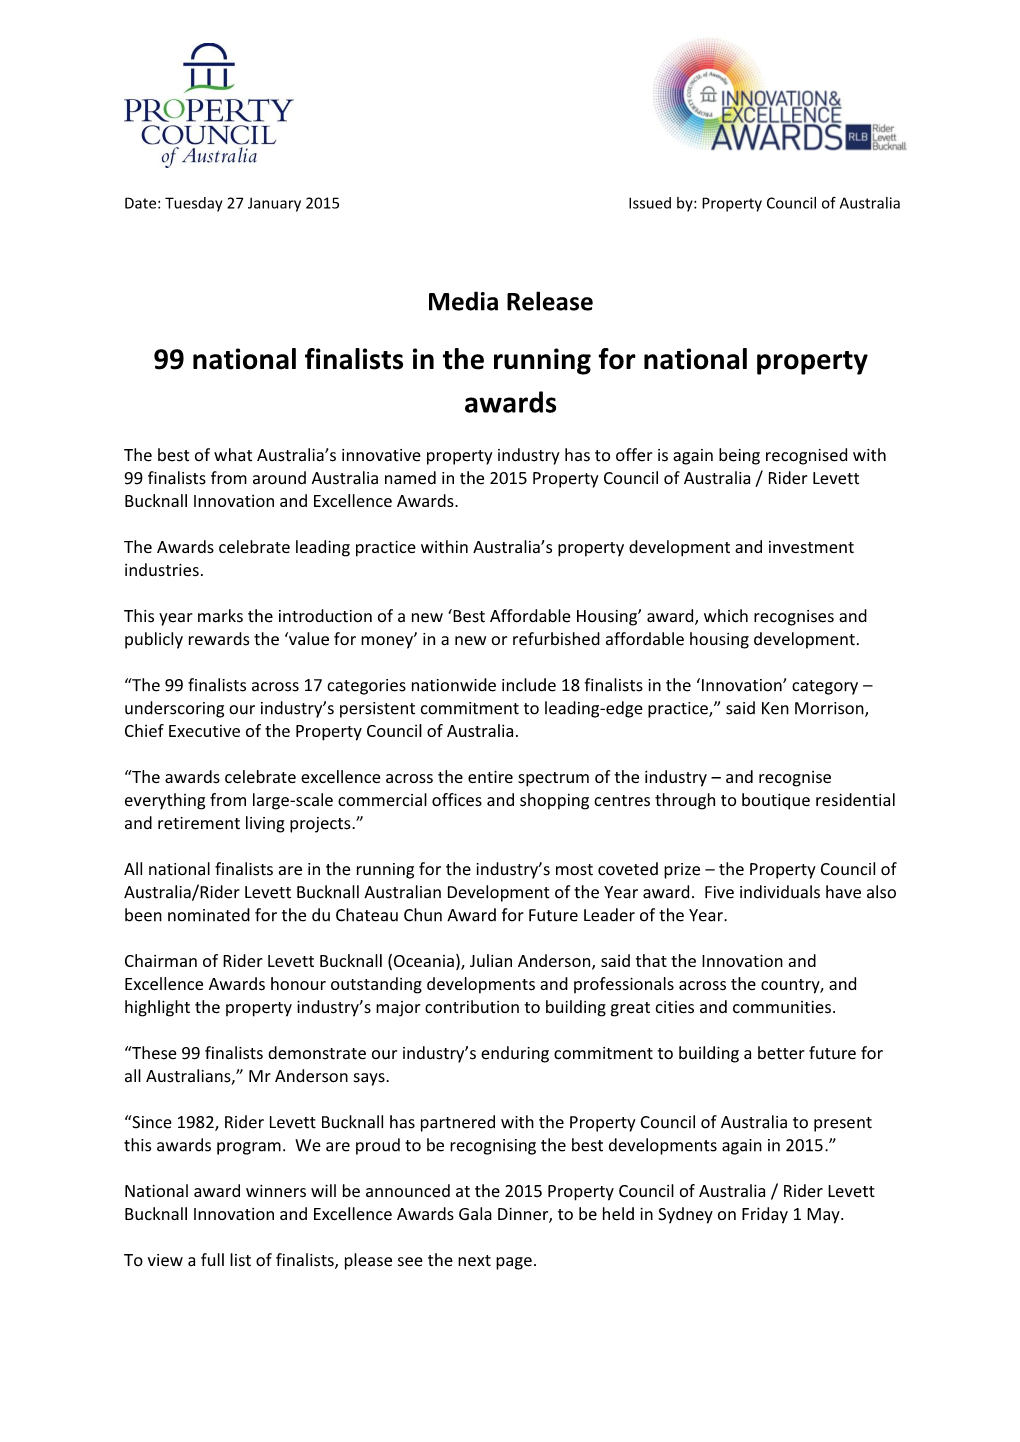 99 National Finalists in the Running for National Property Awards